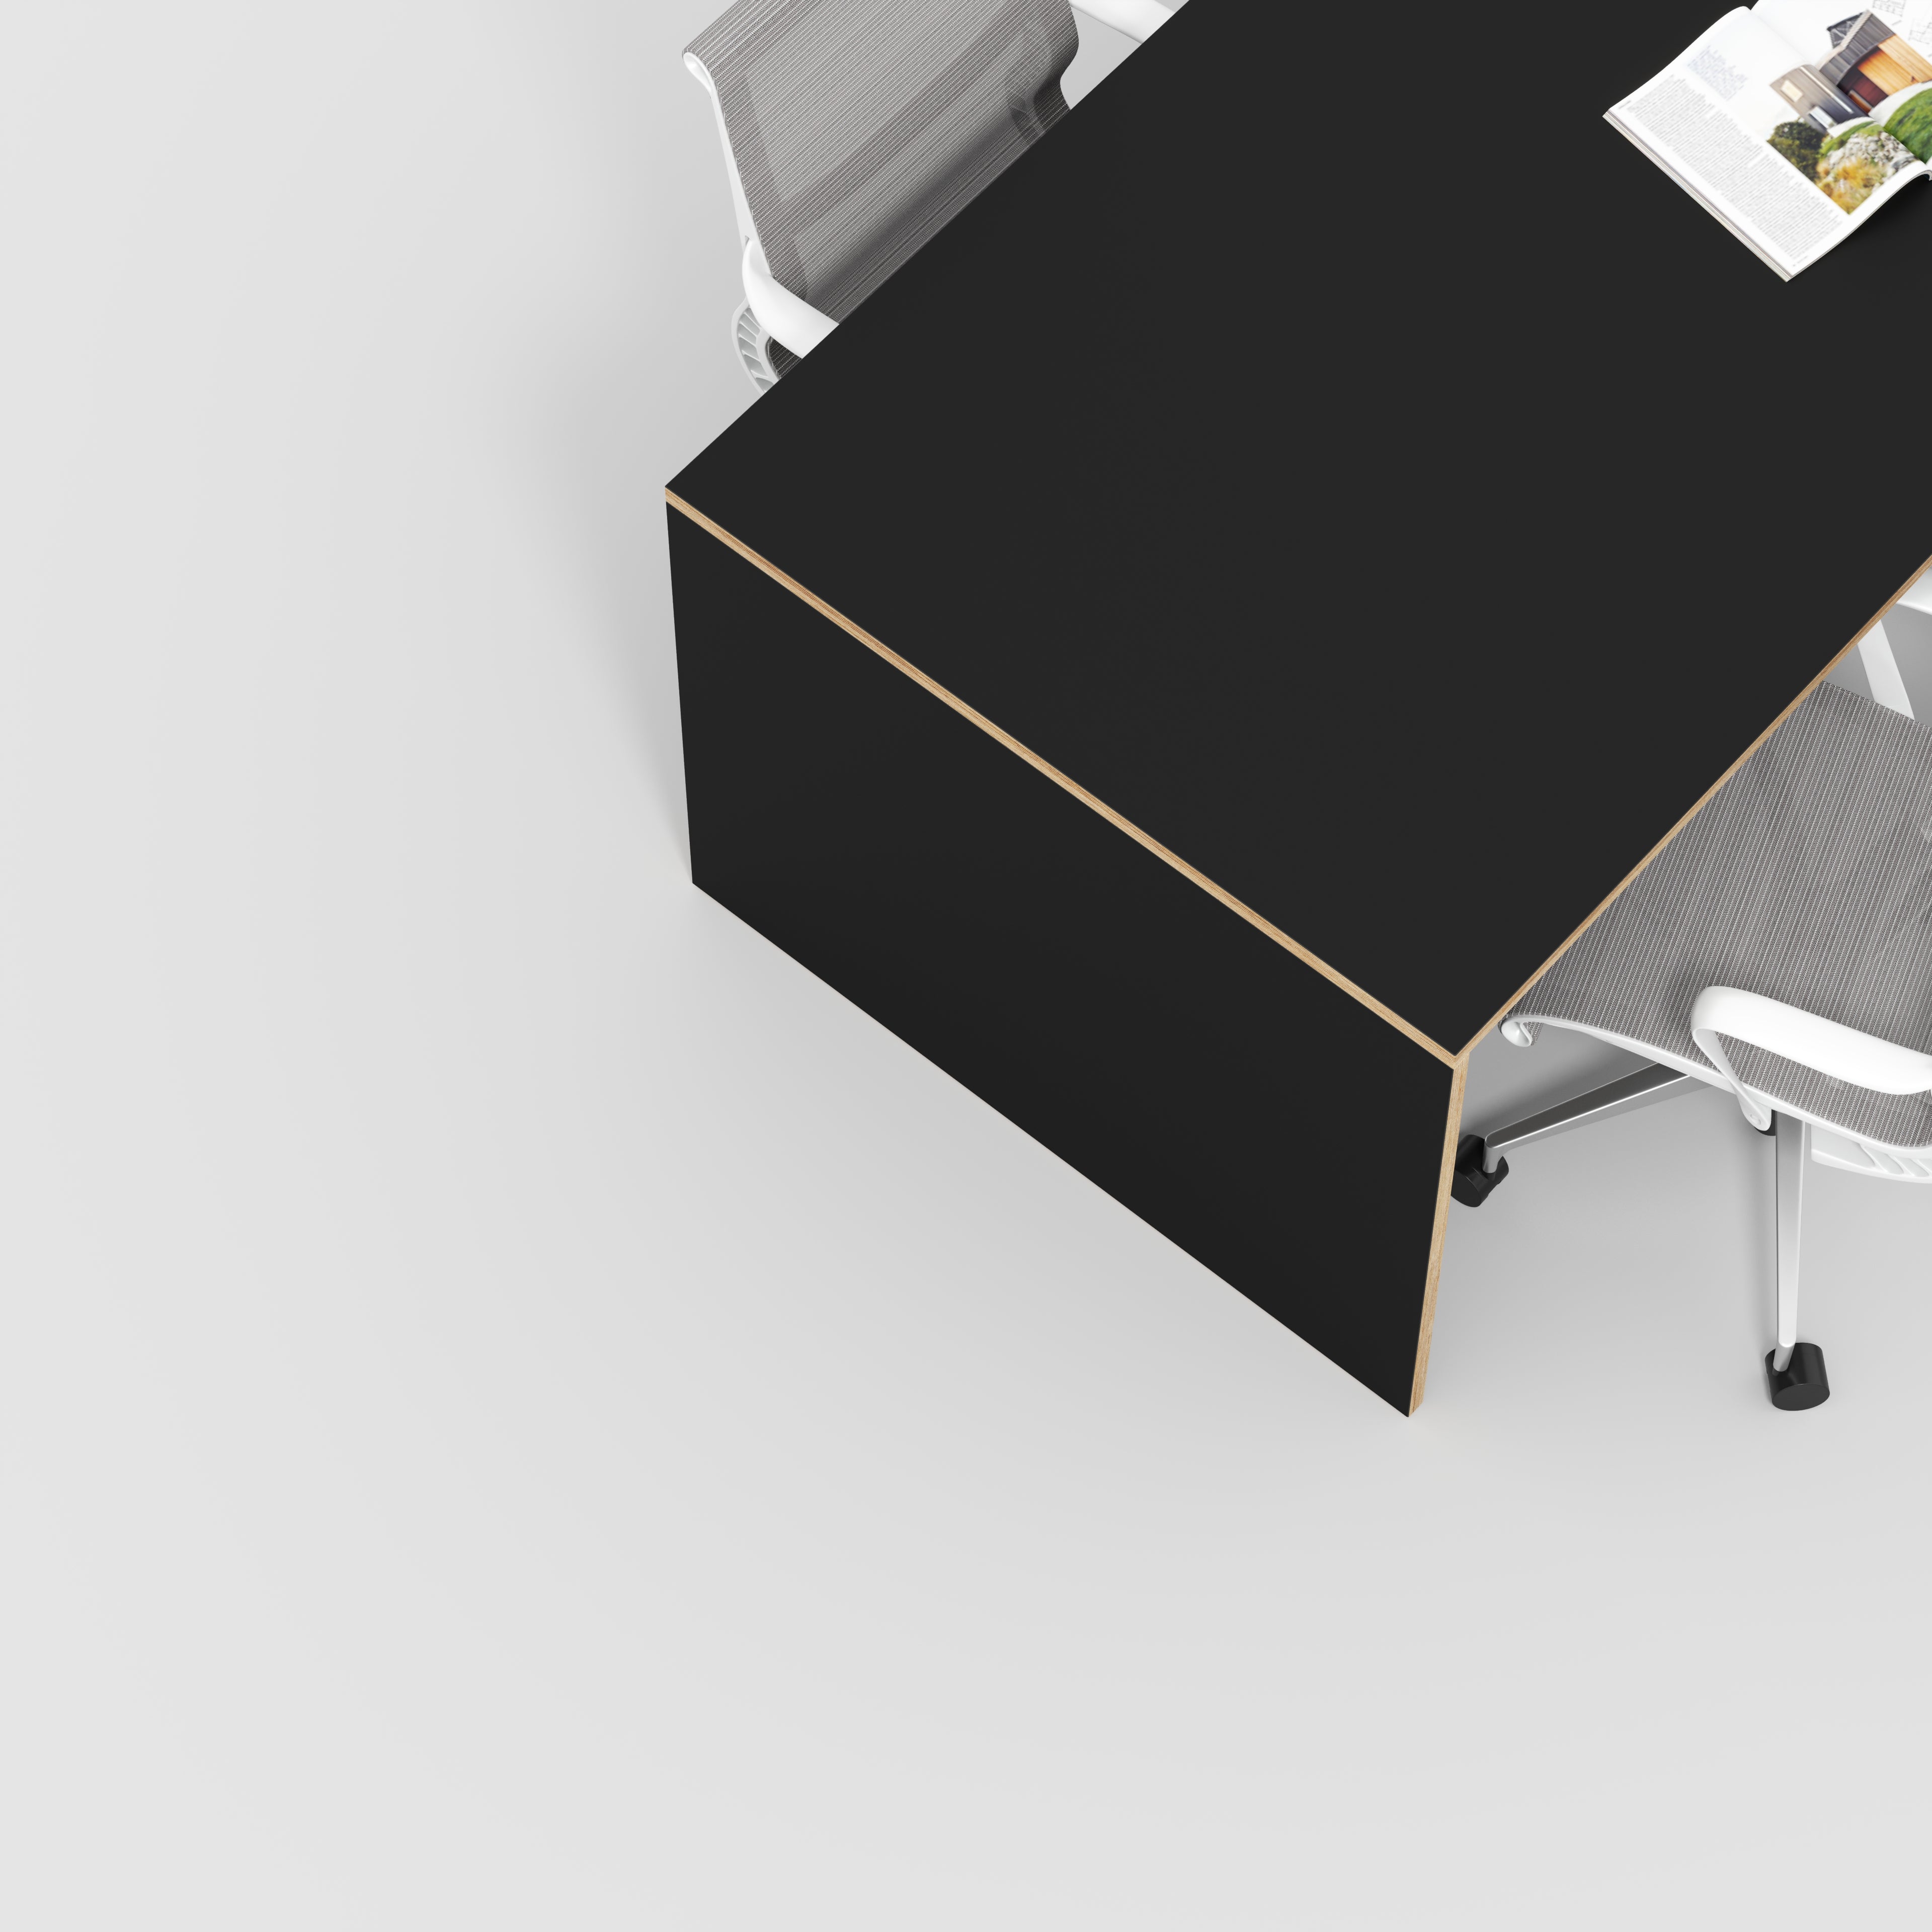 Table with Solid Sides - Formica Diamond Black - 2000(w) x 1000(d) x 750(h)